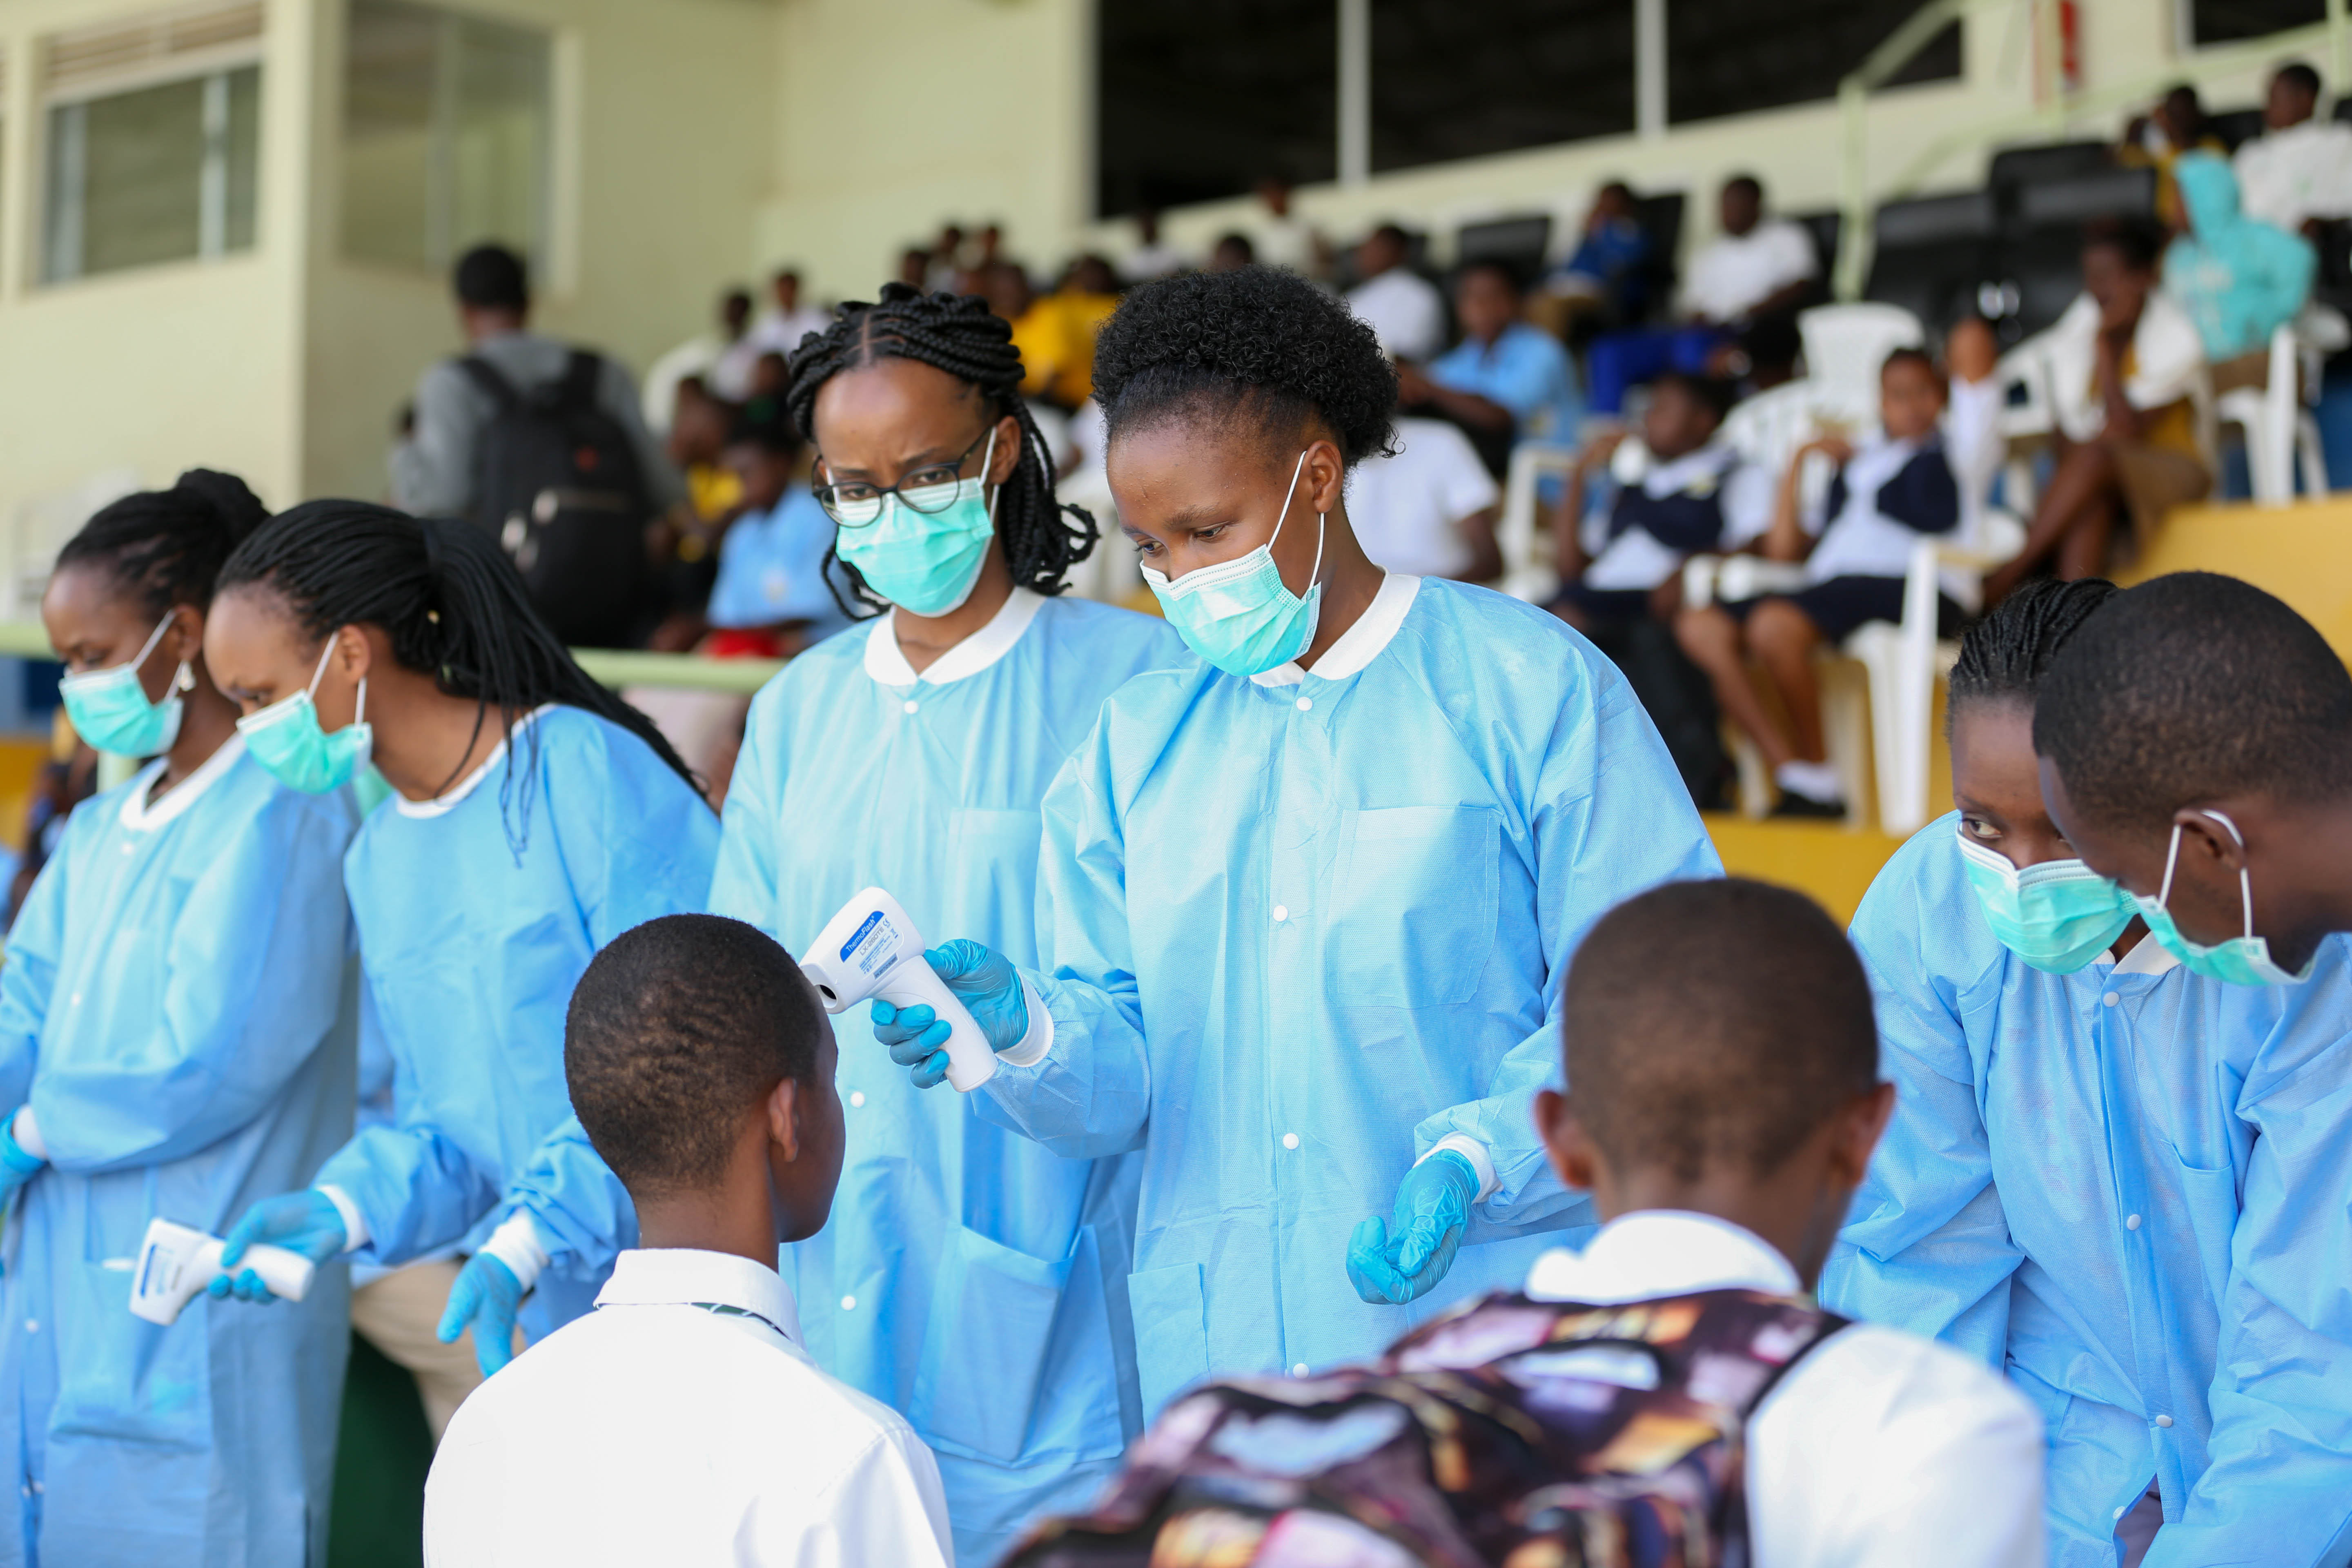 The health ministry reported zero cases yesterday, curbing the outbreak at 11 confirmed cases of the coronavirus since March 14. /Dan Nsengiyumva